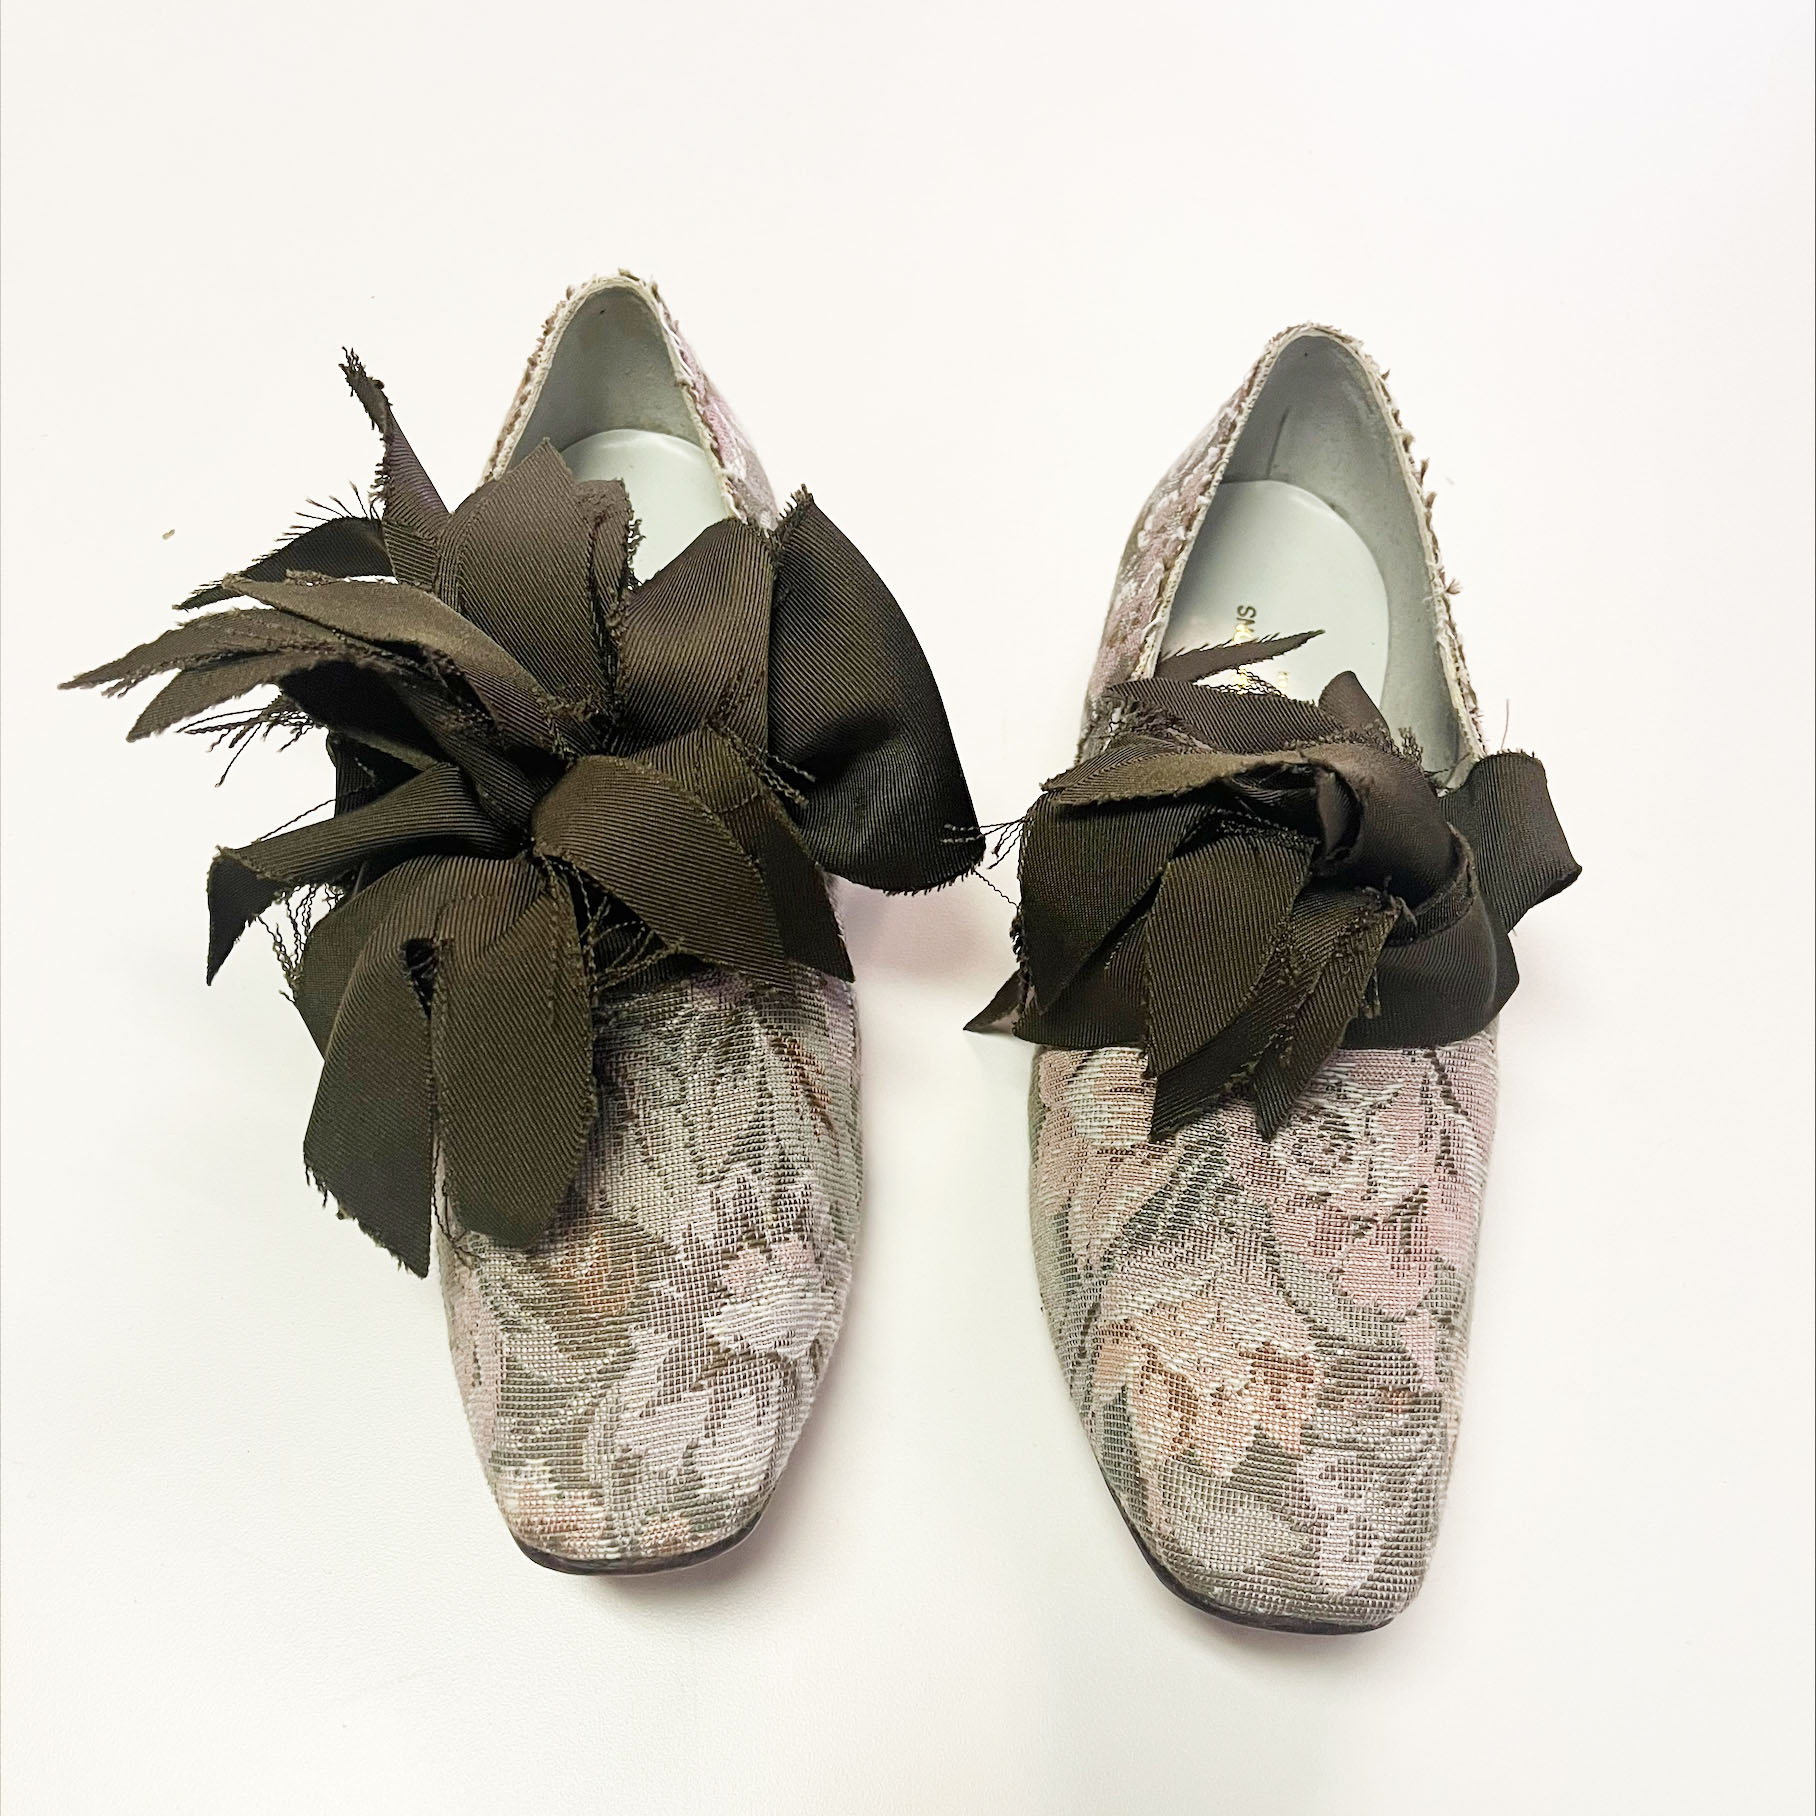 Rei Kawakubo (Japanese, b. 1942), Shoes, Spring 2000, cotton, leather, rayon, Museum purchase: Lawrence Archer Wachs Trust, the Cynthea J. Bogel Collection, 2016.190b-c